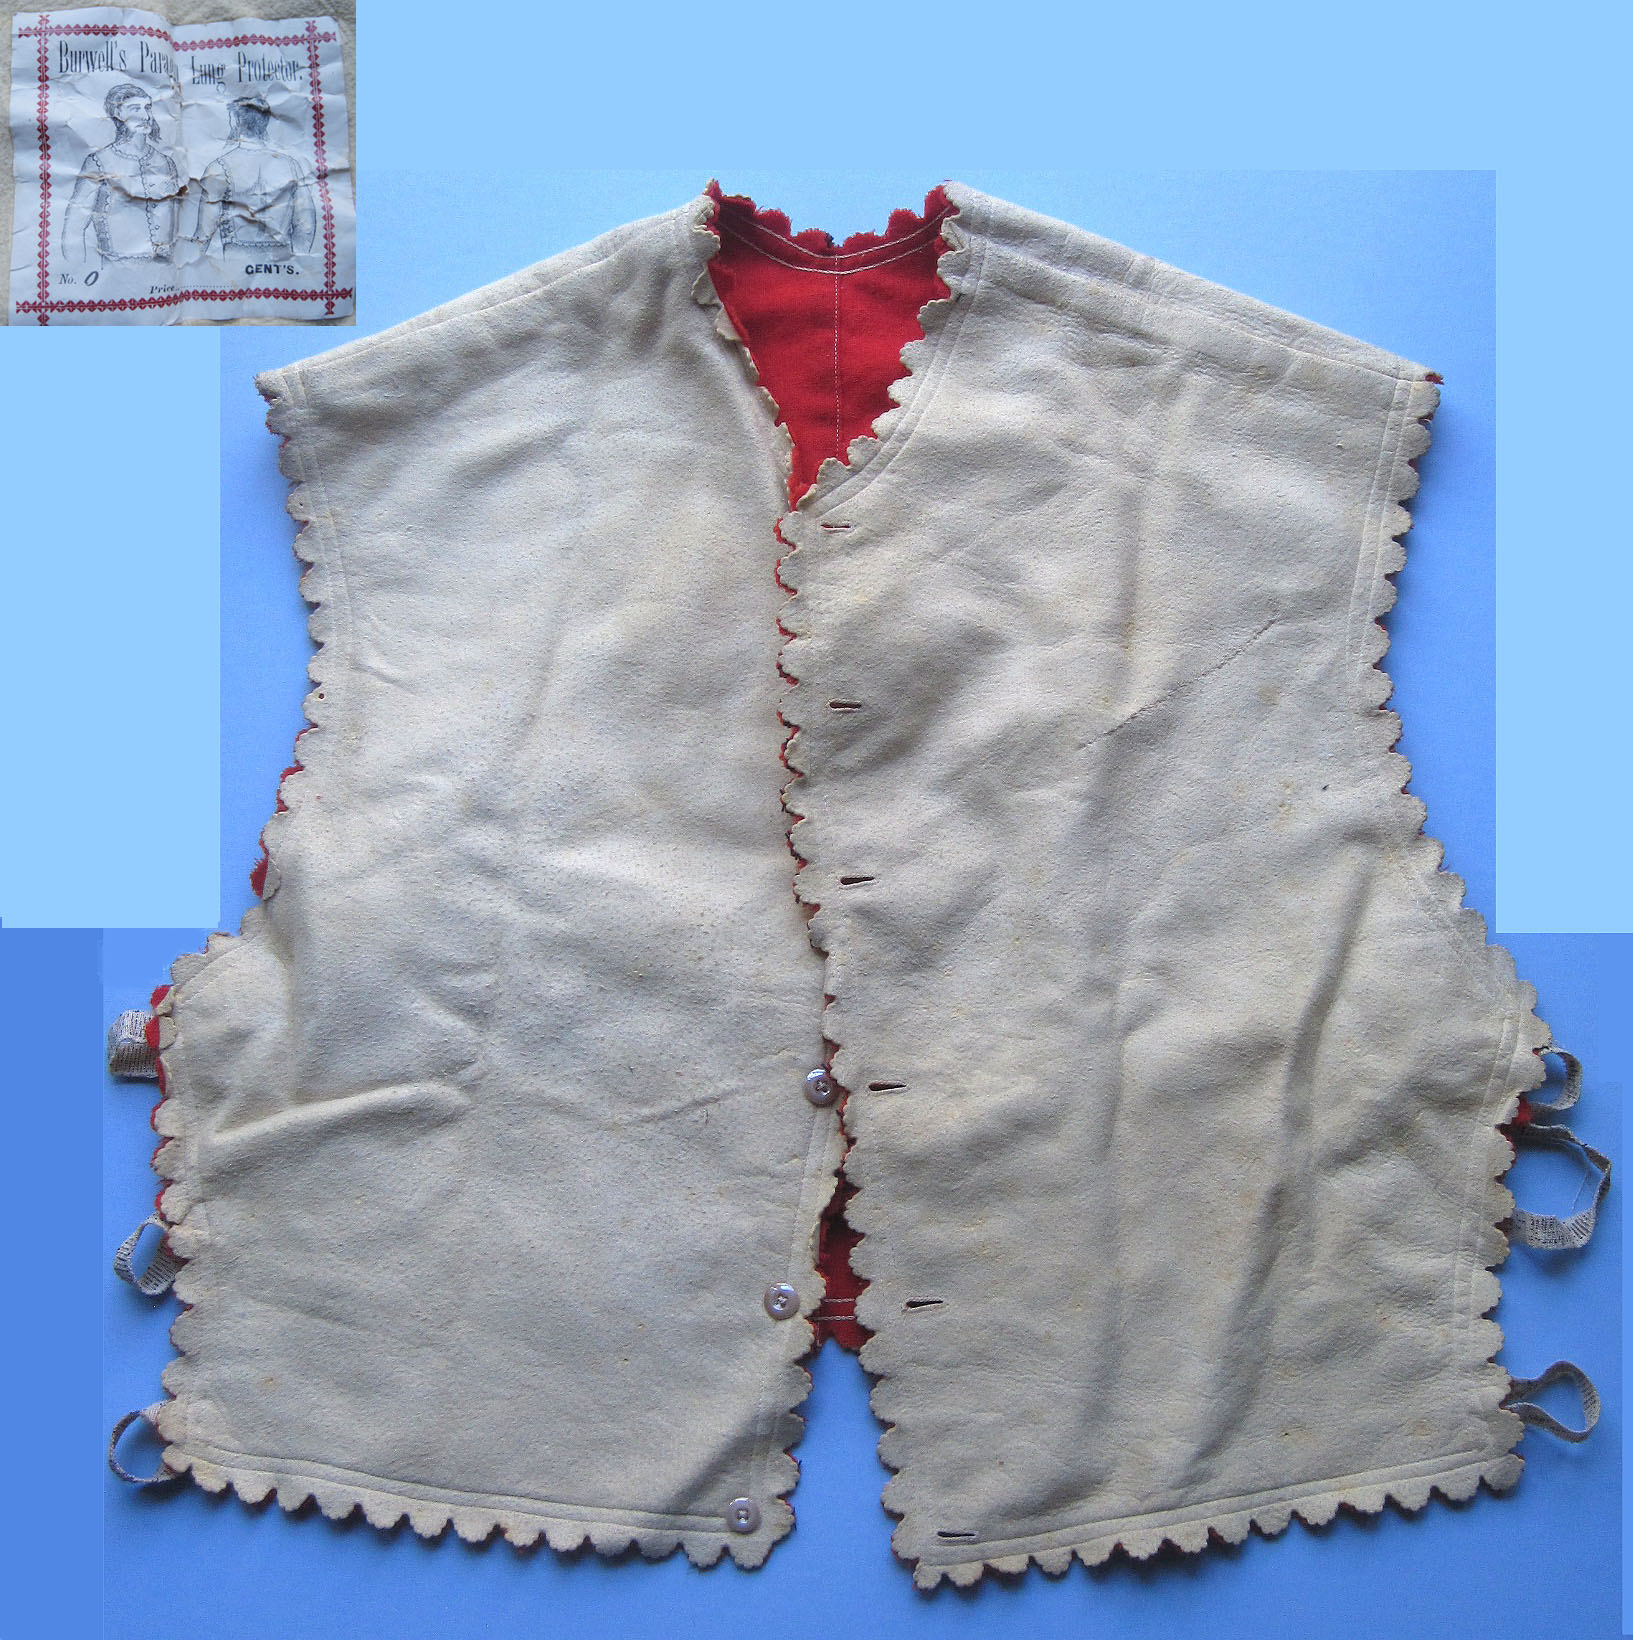 Burwell’s  Boston Paragon Lung Protector Vest